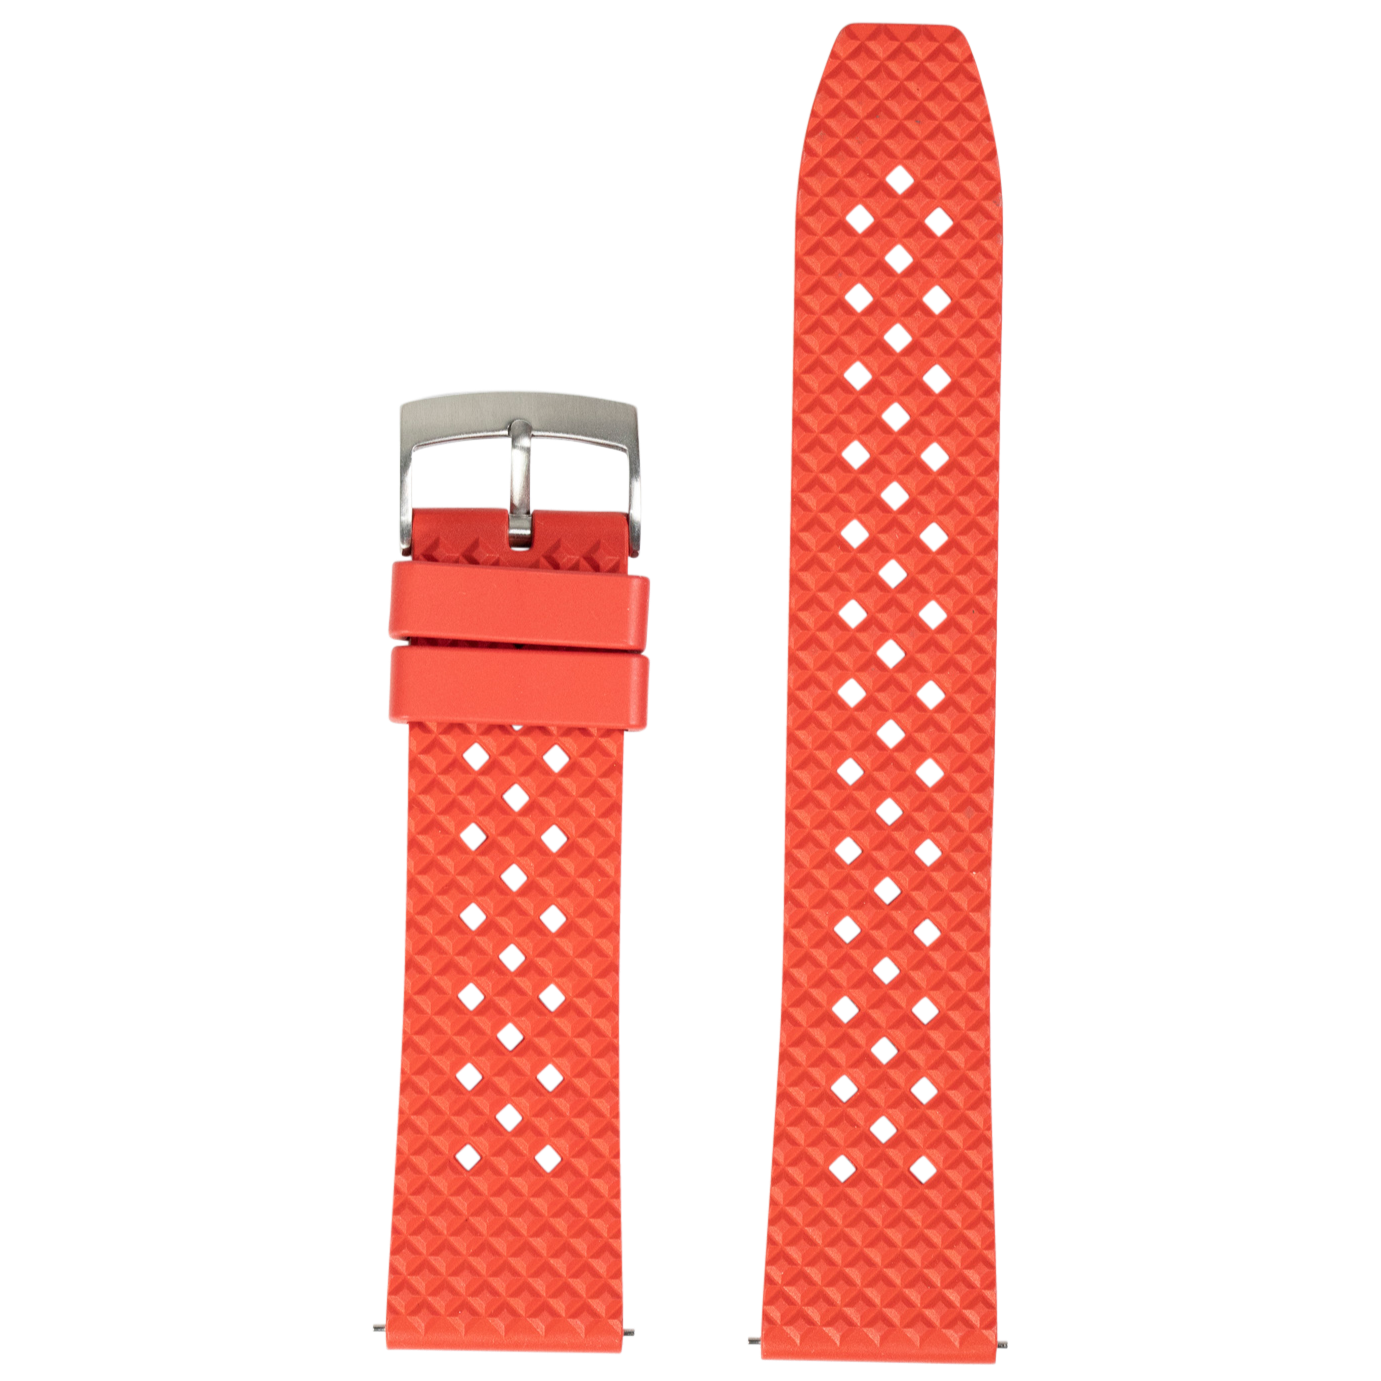 [Apple Watch] King Honeycomb FKM Rubber - Red